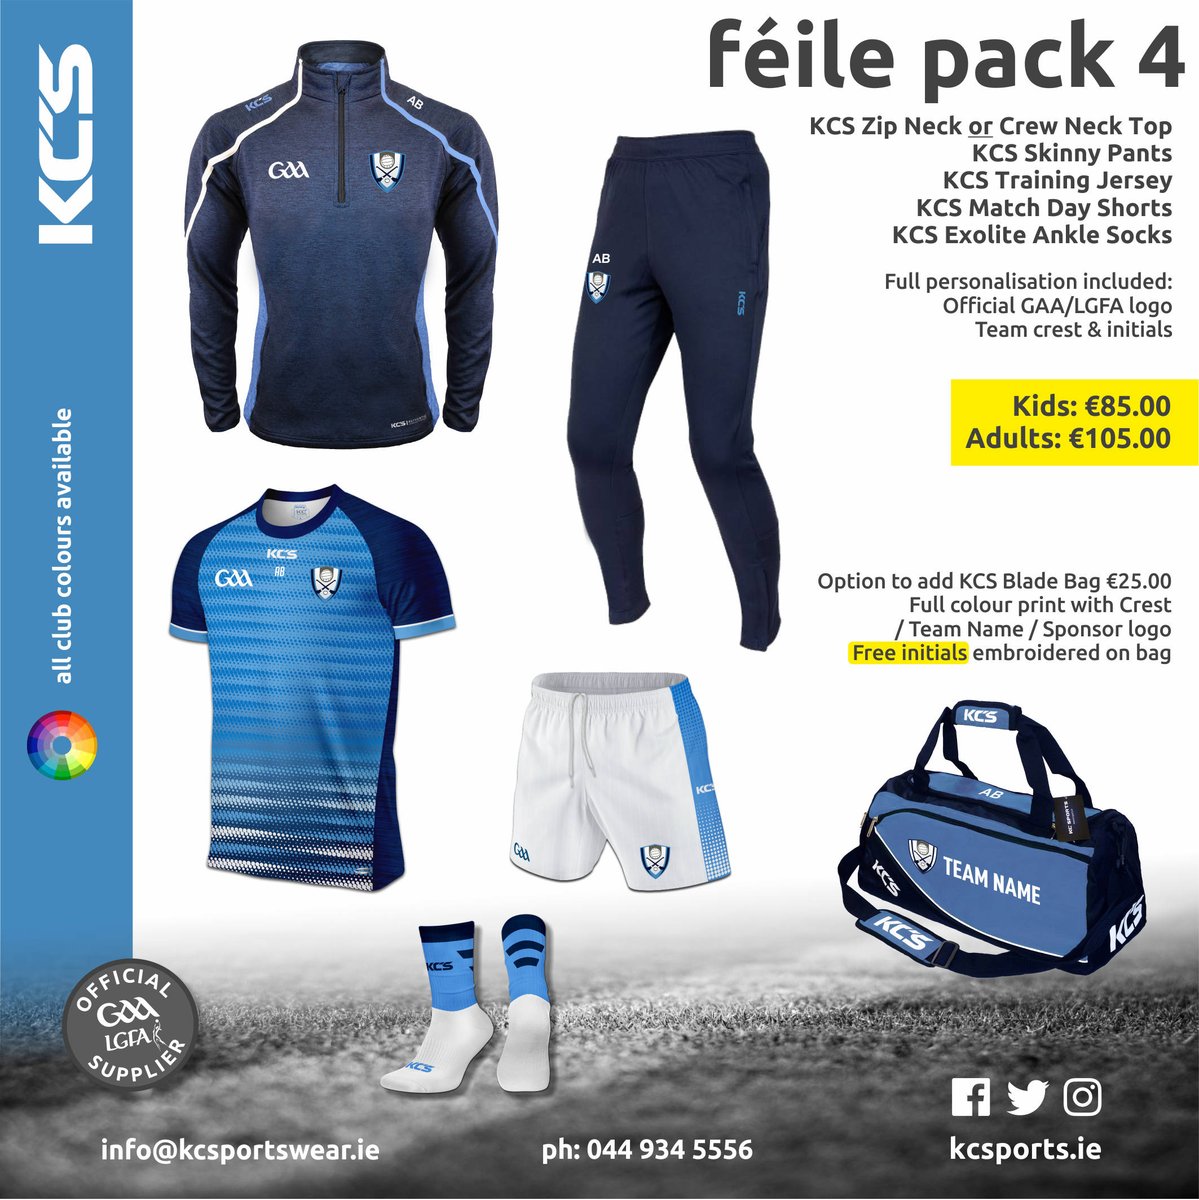 ✍️✍️ Take note of our latest Feile Pack Offer 💙💙💙 Contact our Sales Team if you need more info ➡️ 📭 niamh@kcsportswear.ie 📭 chris@kcsportswear.ie 📲 044 93 45556 #FridayFeeling #itstheweekend #gaabeo #gaa #lgfa #KCSirl #offers